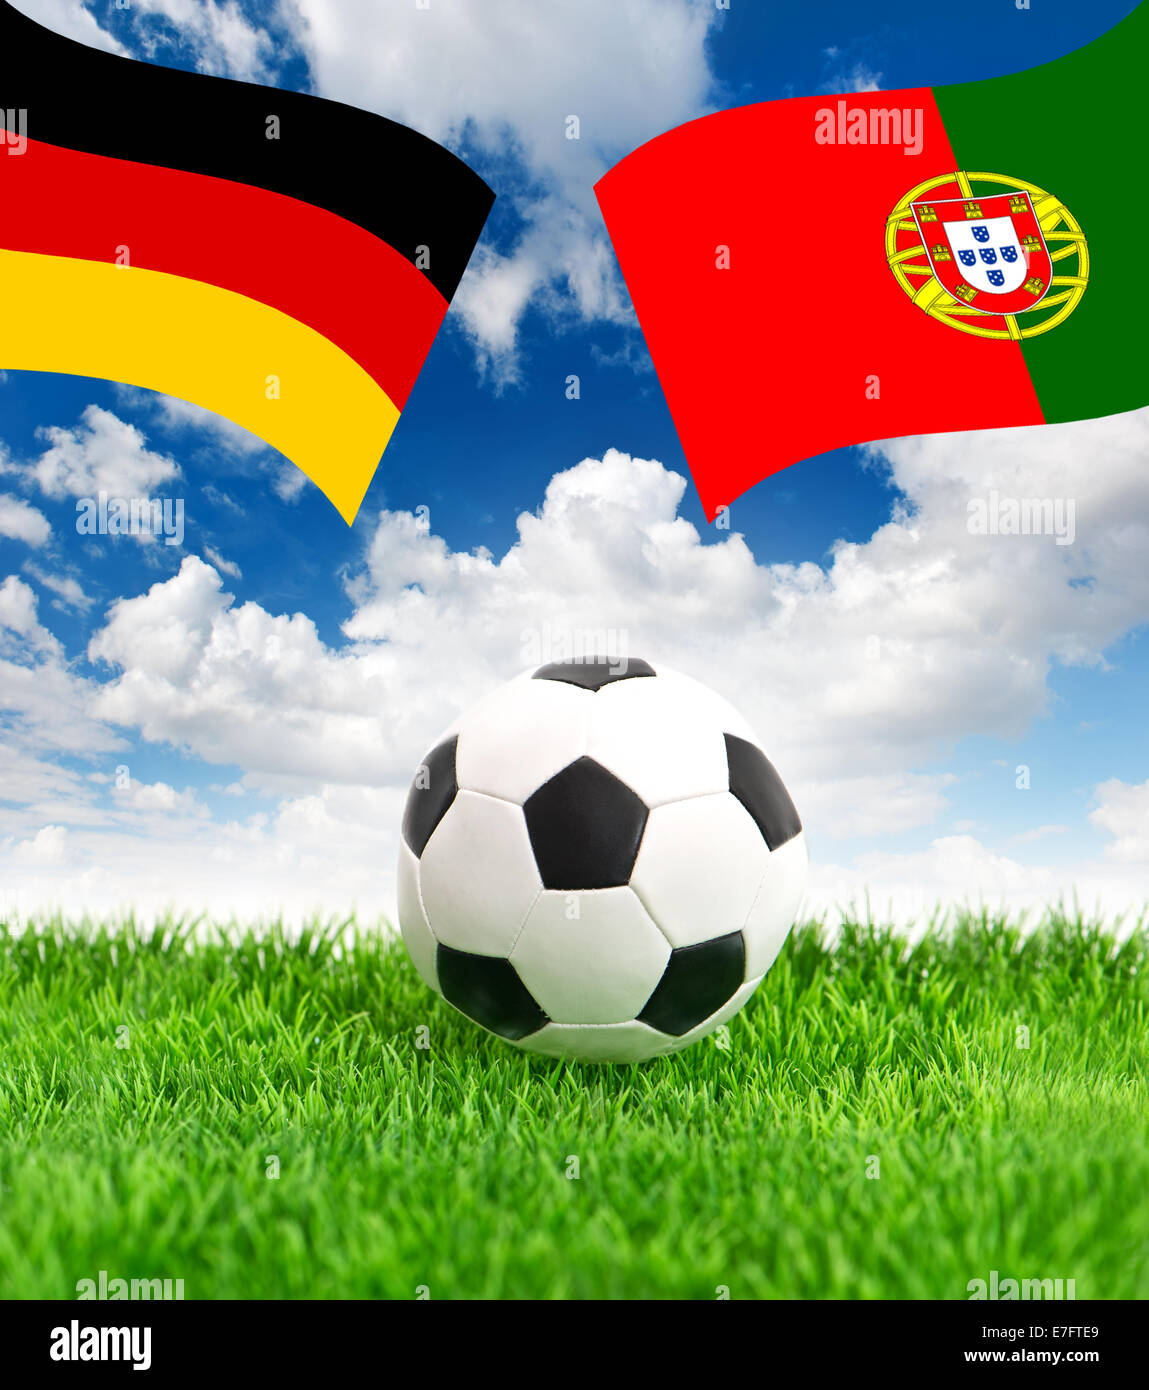 soccer ball on green grass and naional flags of germany and portugal over dramatic blue sky Stock Photo